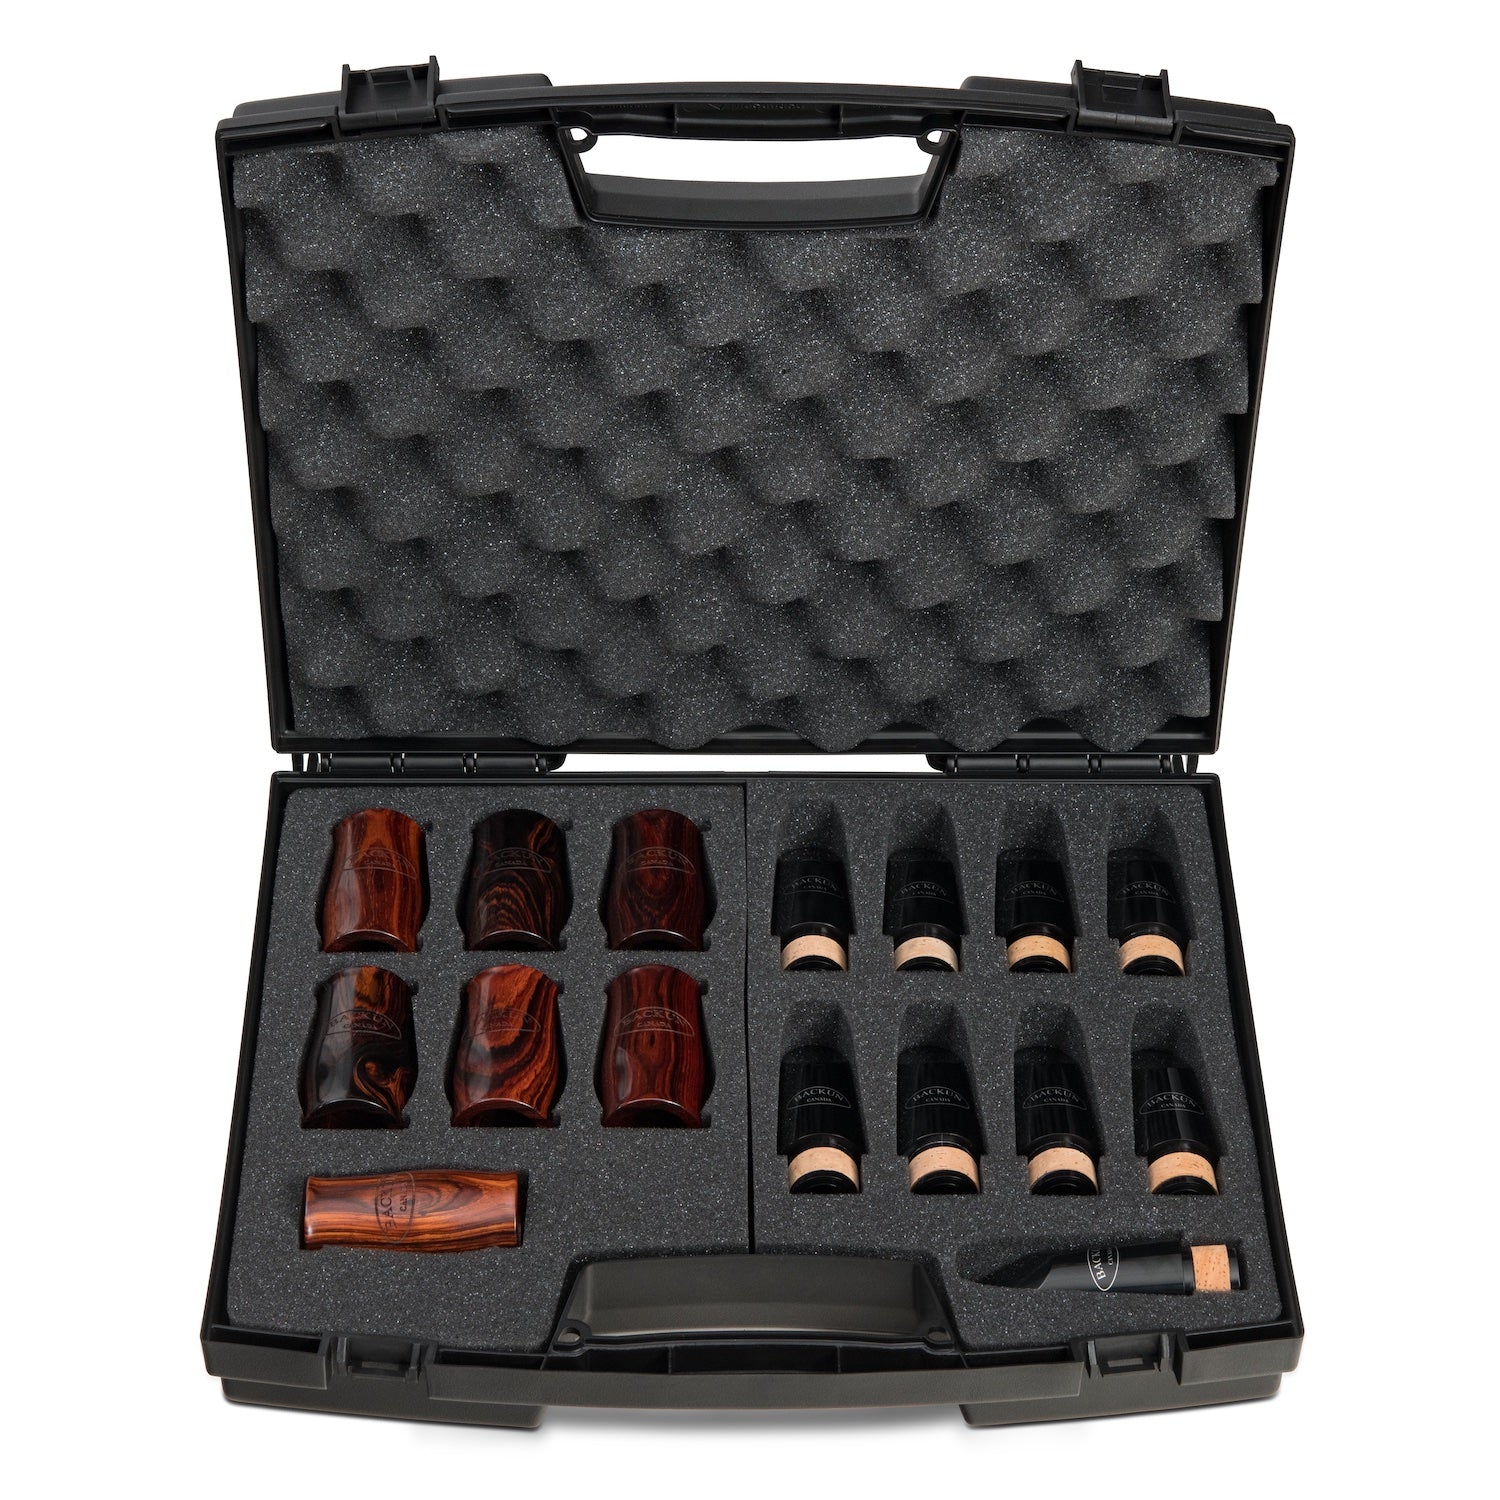 Backun Mouthpiece or Barrel Case Open 7 Barrels and 9 Mouthpieces